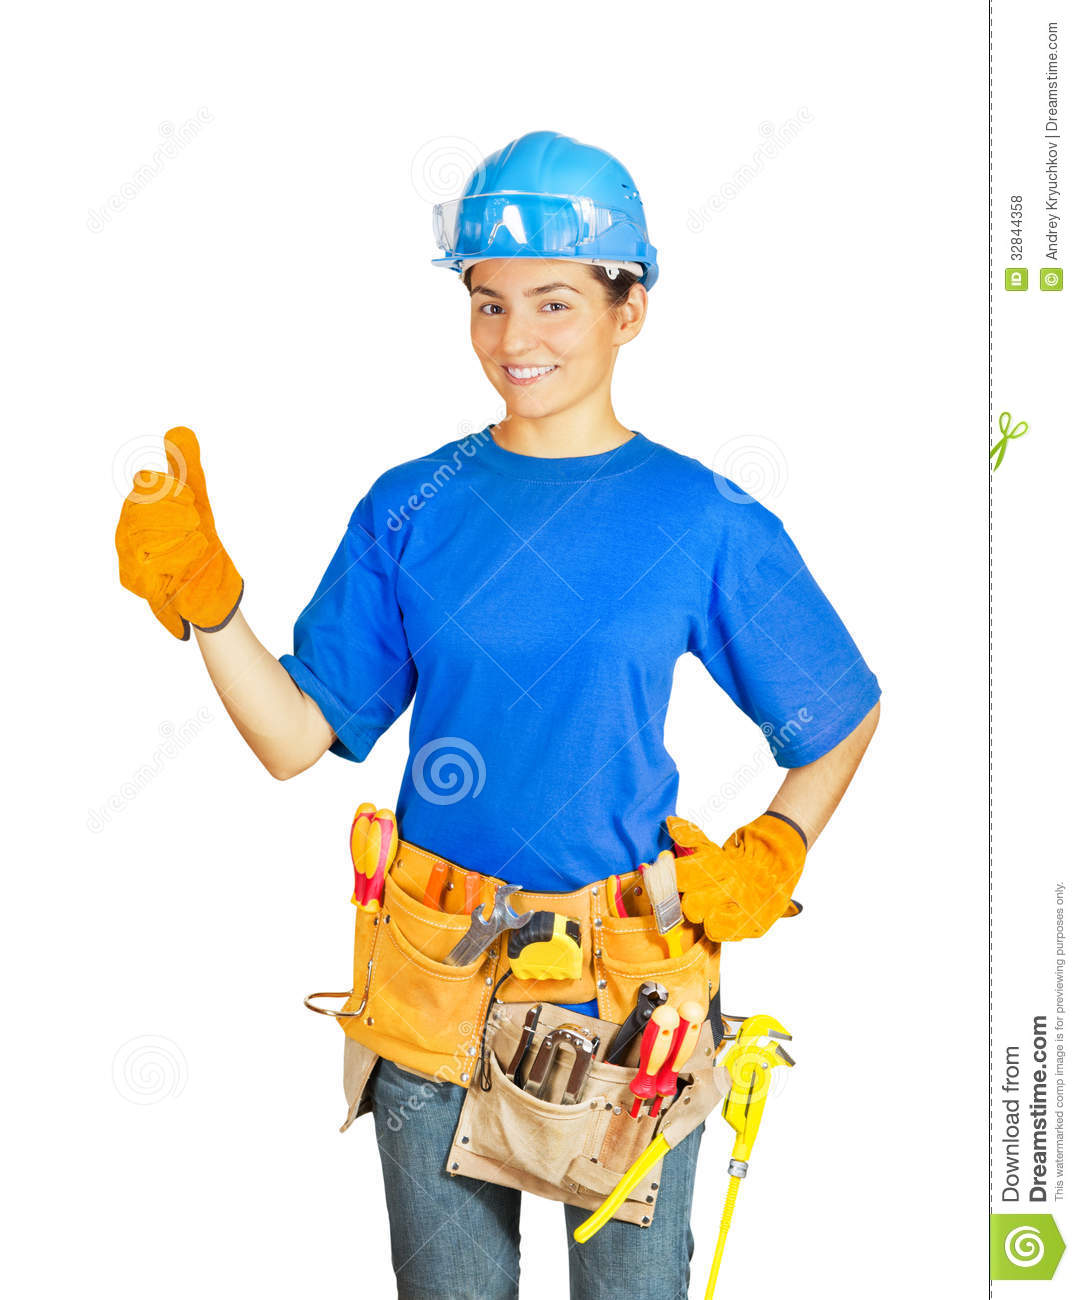 Home Improvement Worker Stock Image